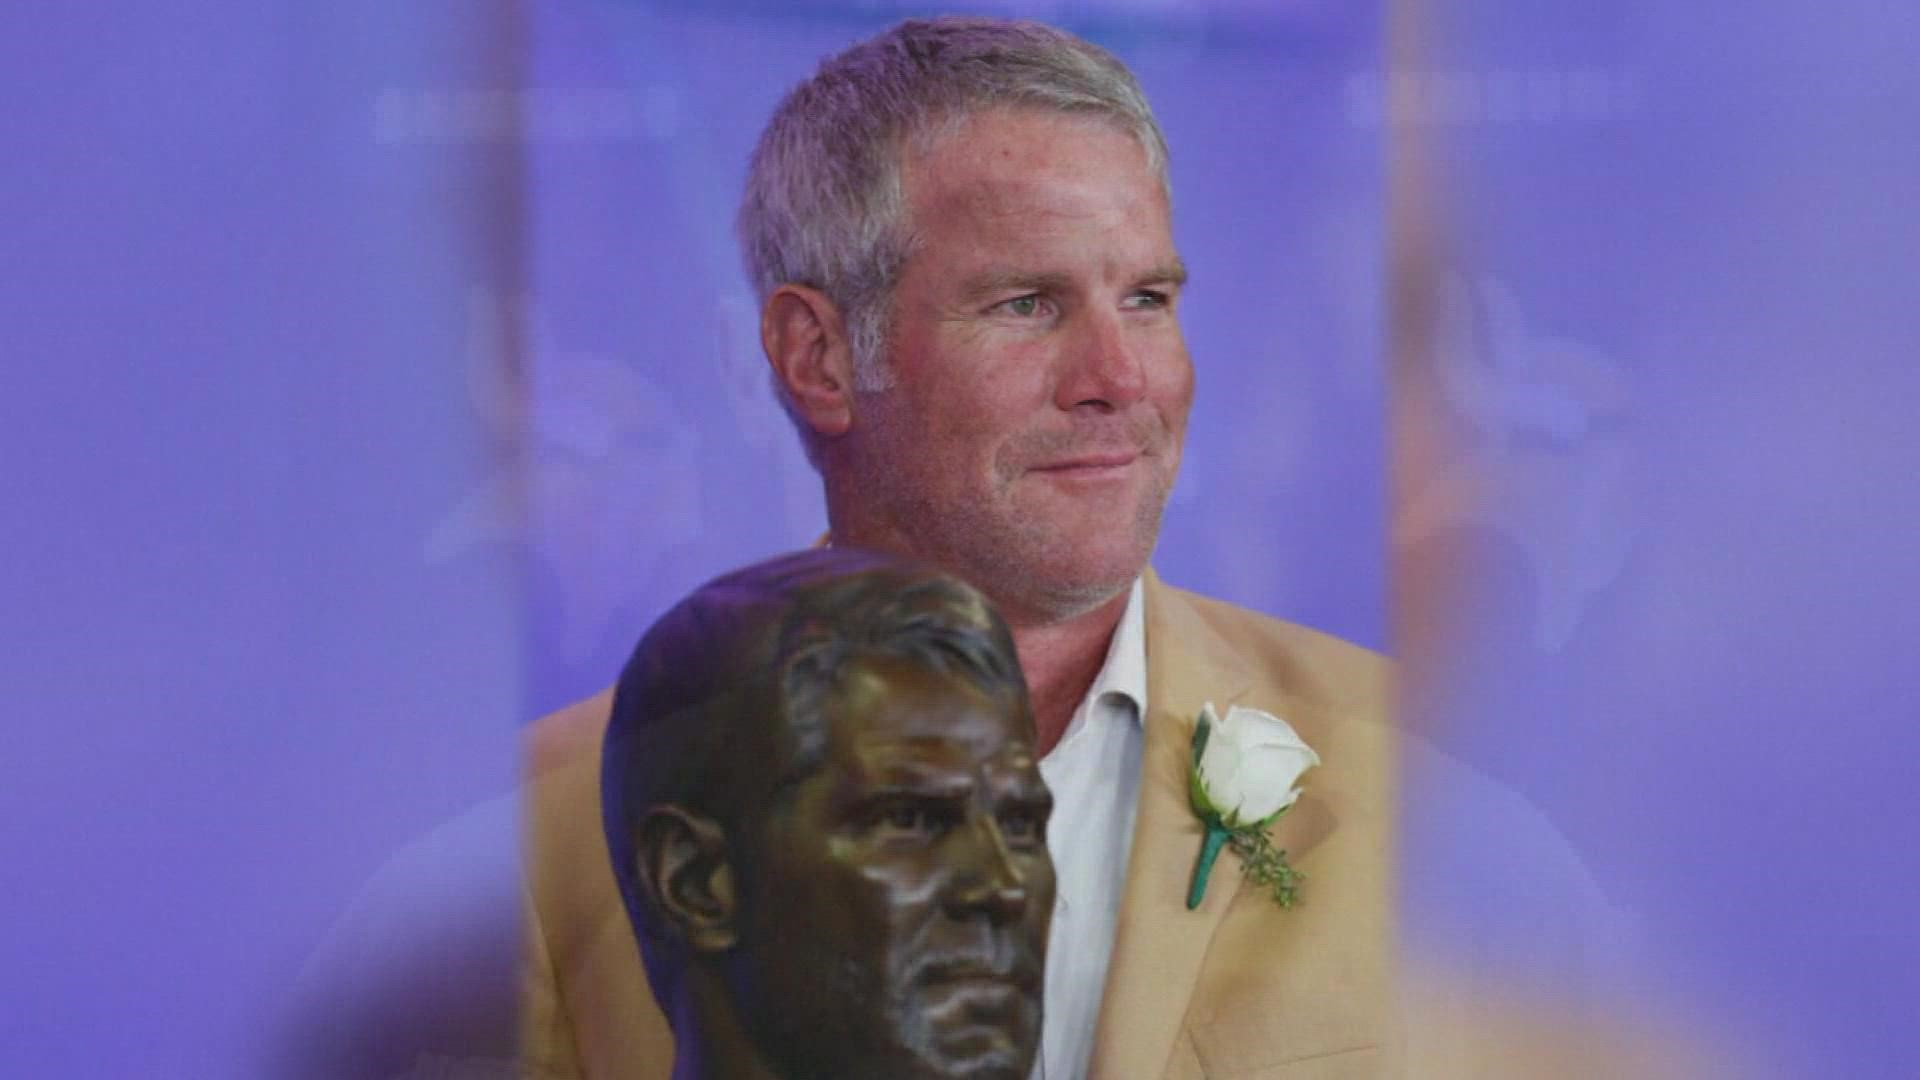 New court documents show retired NFL quarterback Brett Favre texted Mississippi governor in 2019 to ask about getting more money from the state's welfare agency.